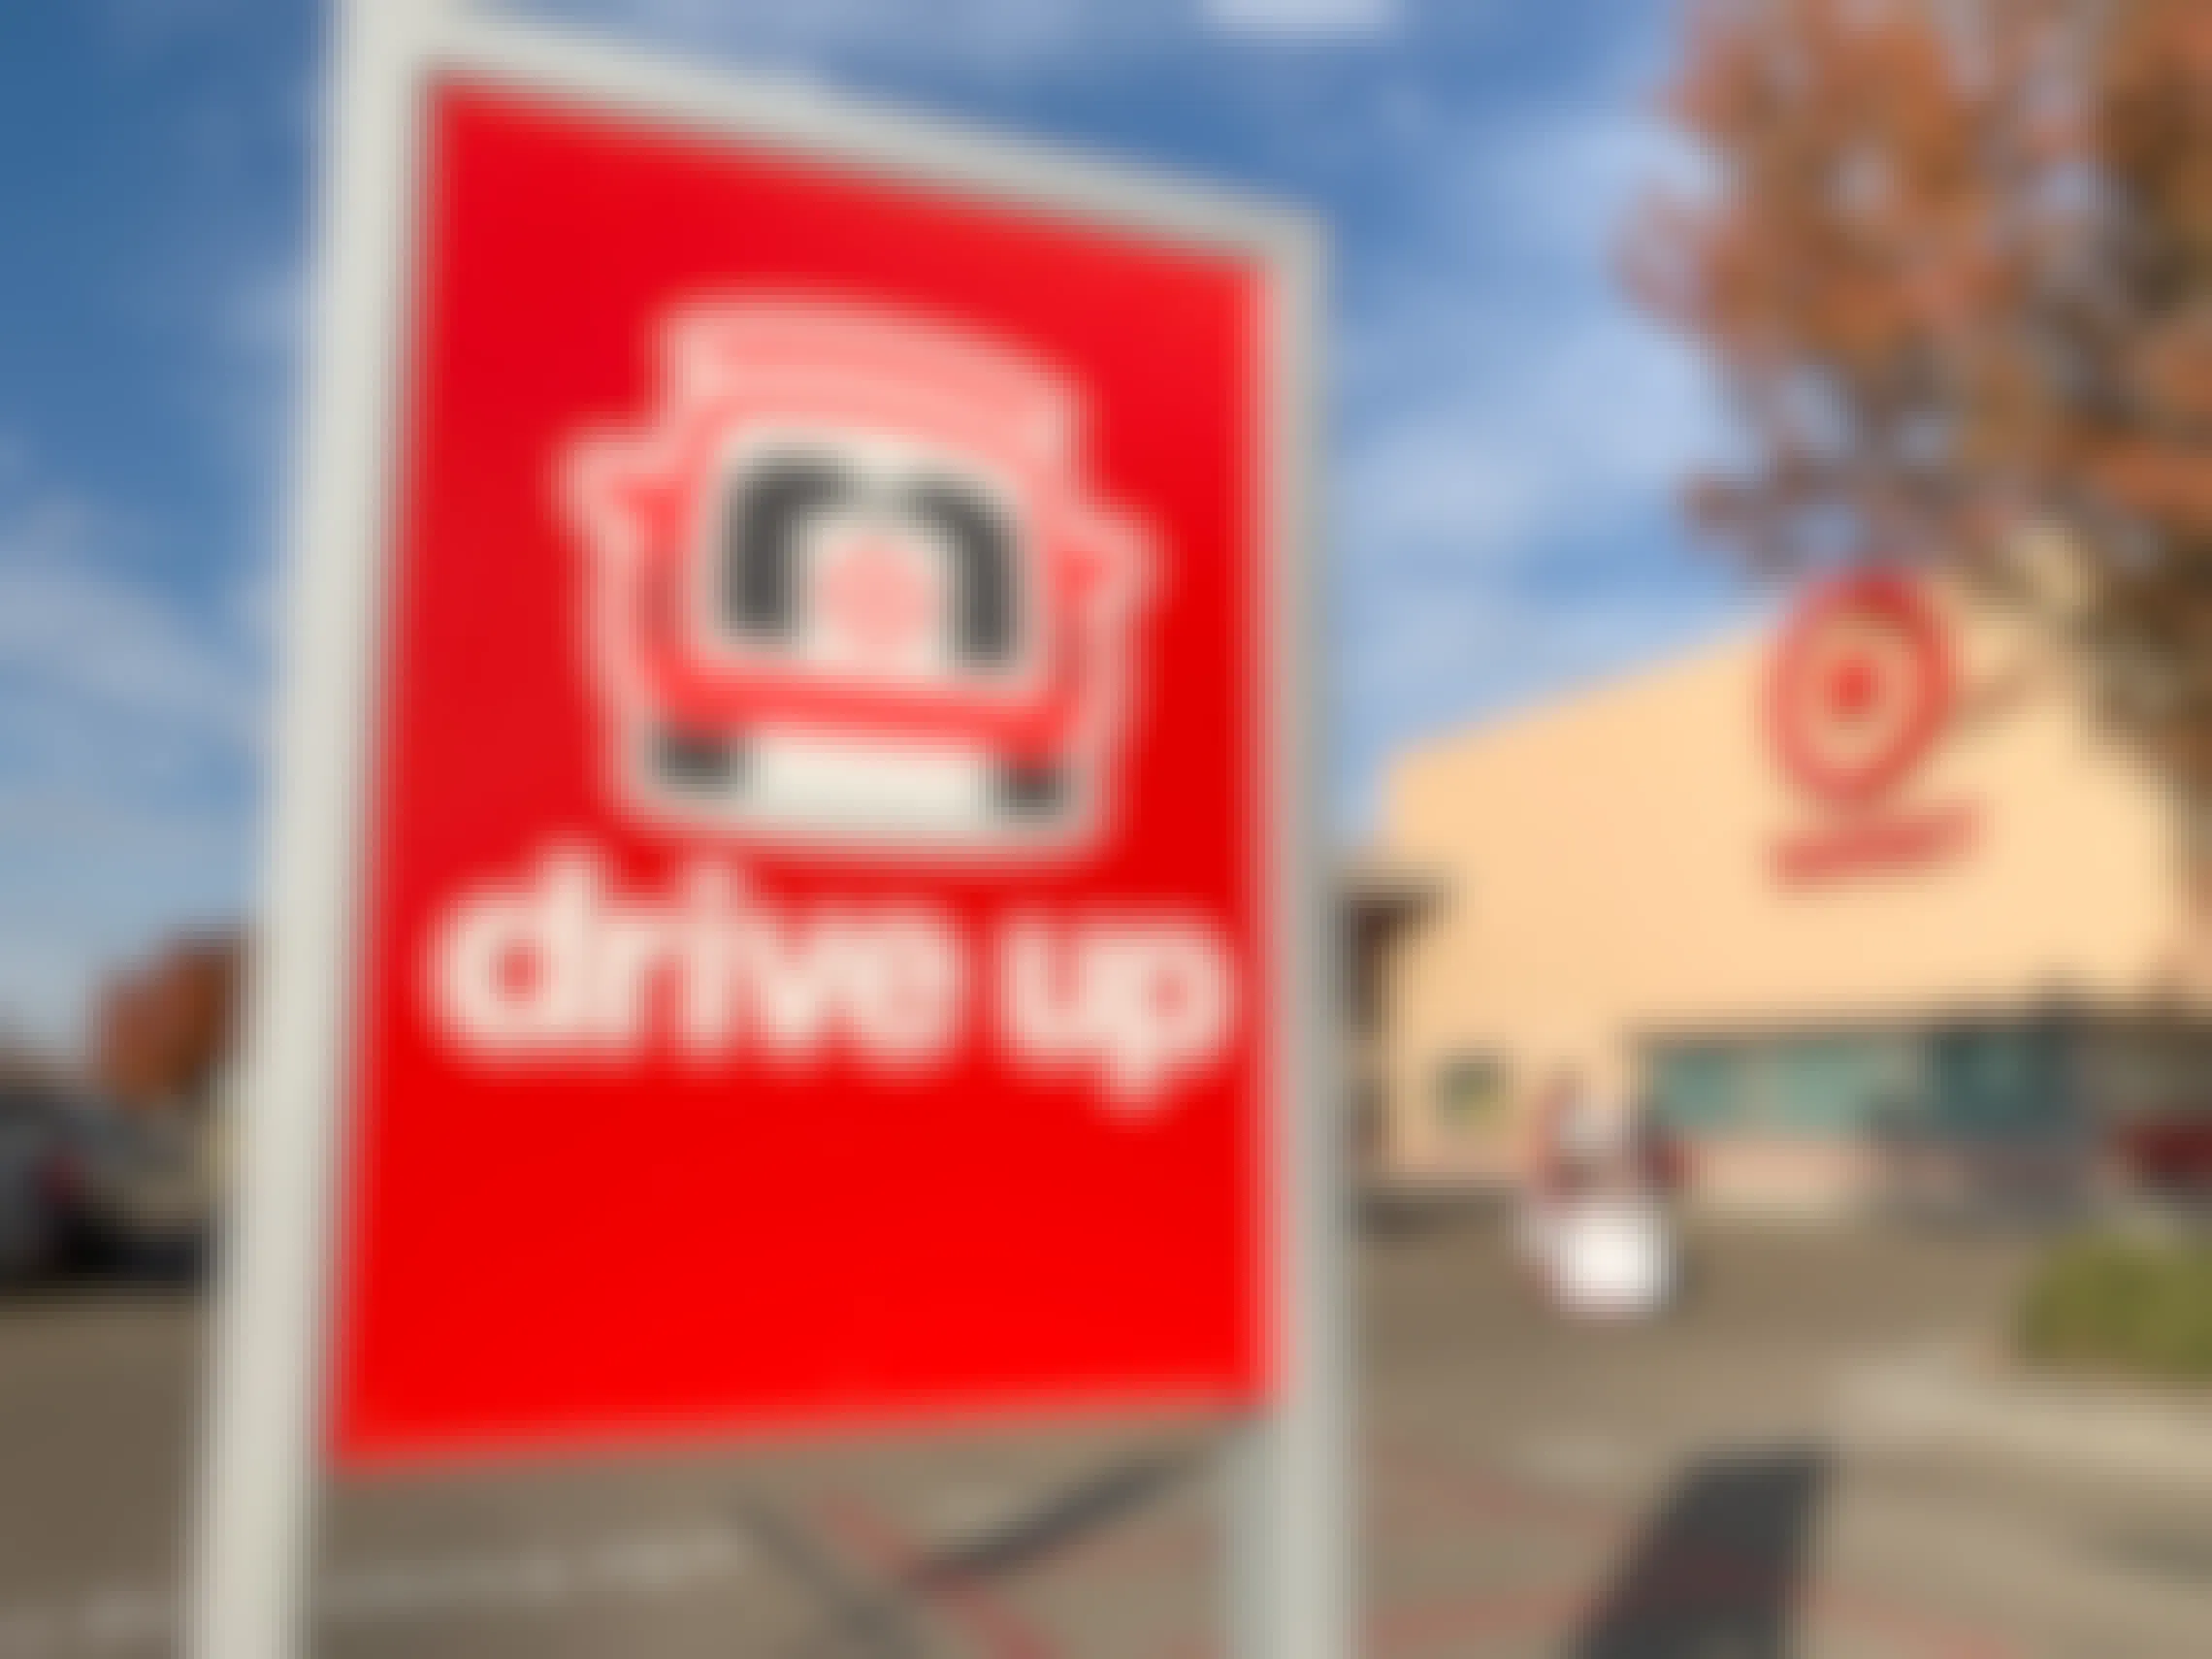 The Target Drive Up sign in the parking lot in front of a Target storefront.